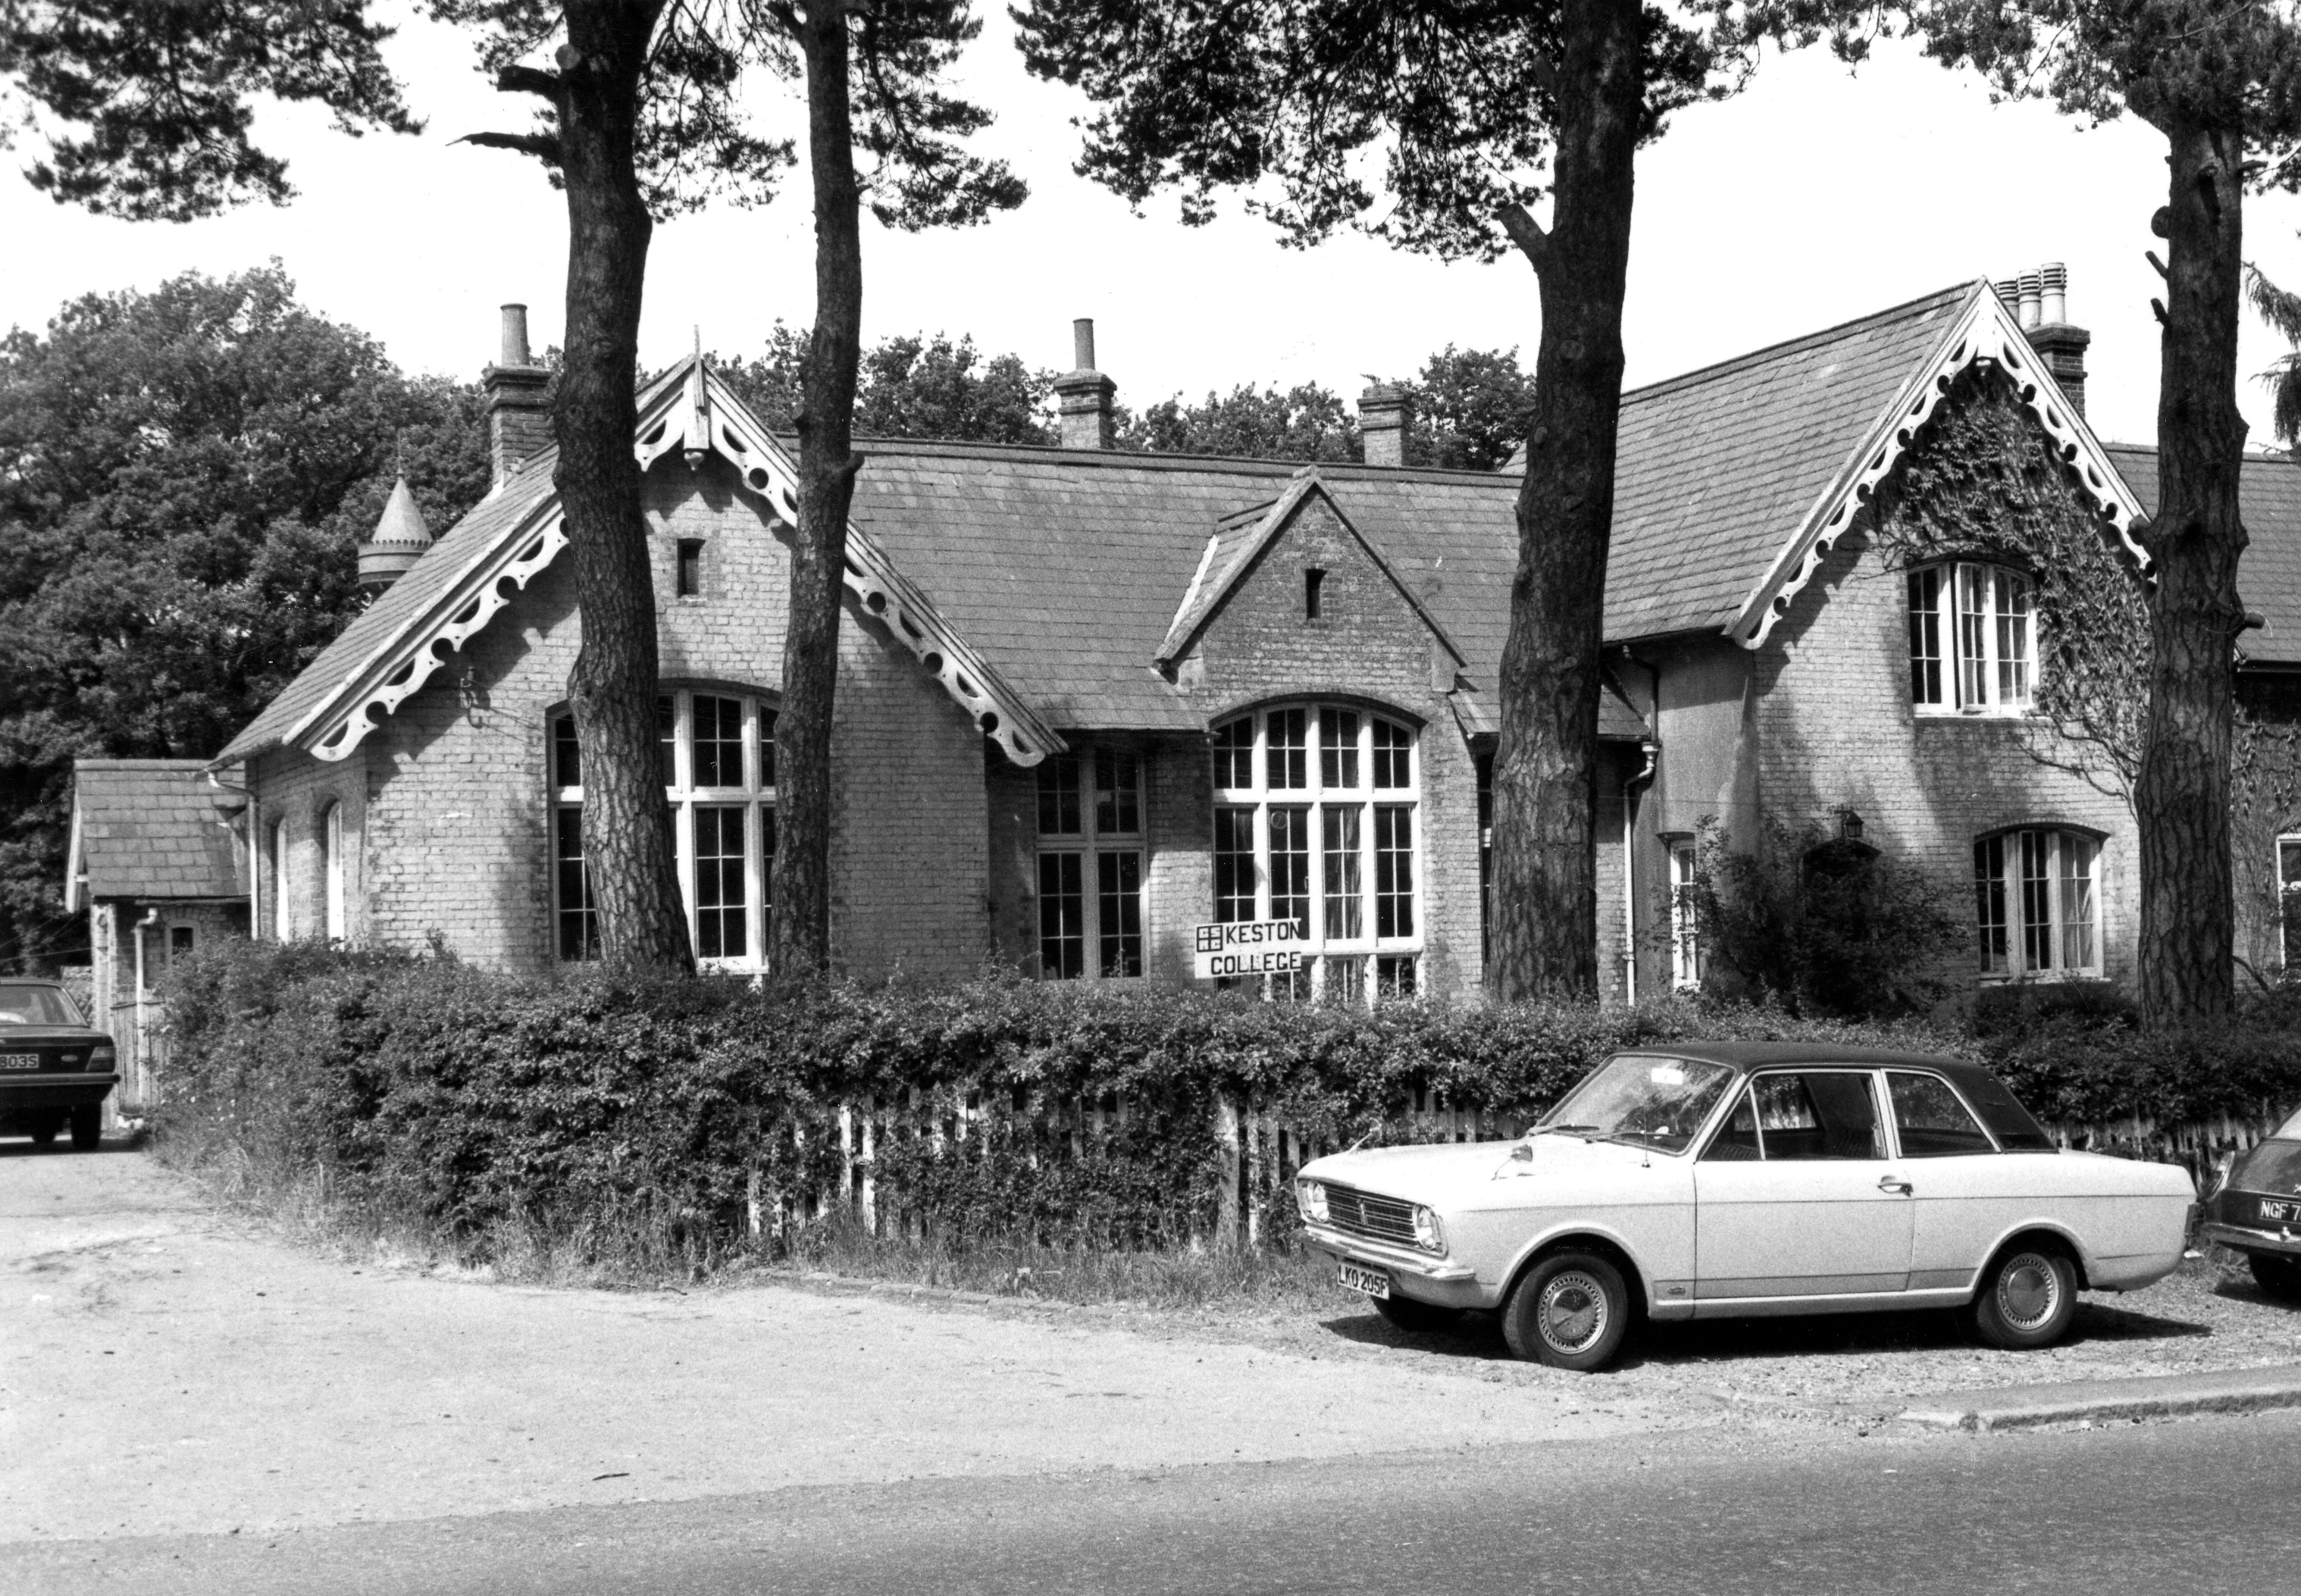 “The Keston College in Kent,” 1978, Keston Digital Archive
Description: “The Keston College purchased the building of the former Keston Primary School in Kent, England in 1974.”